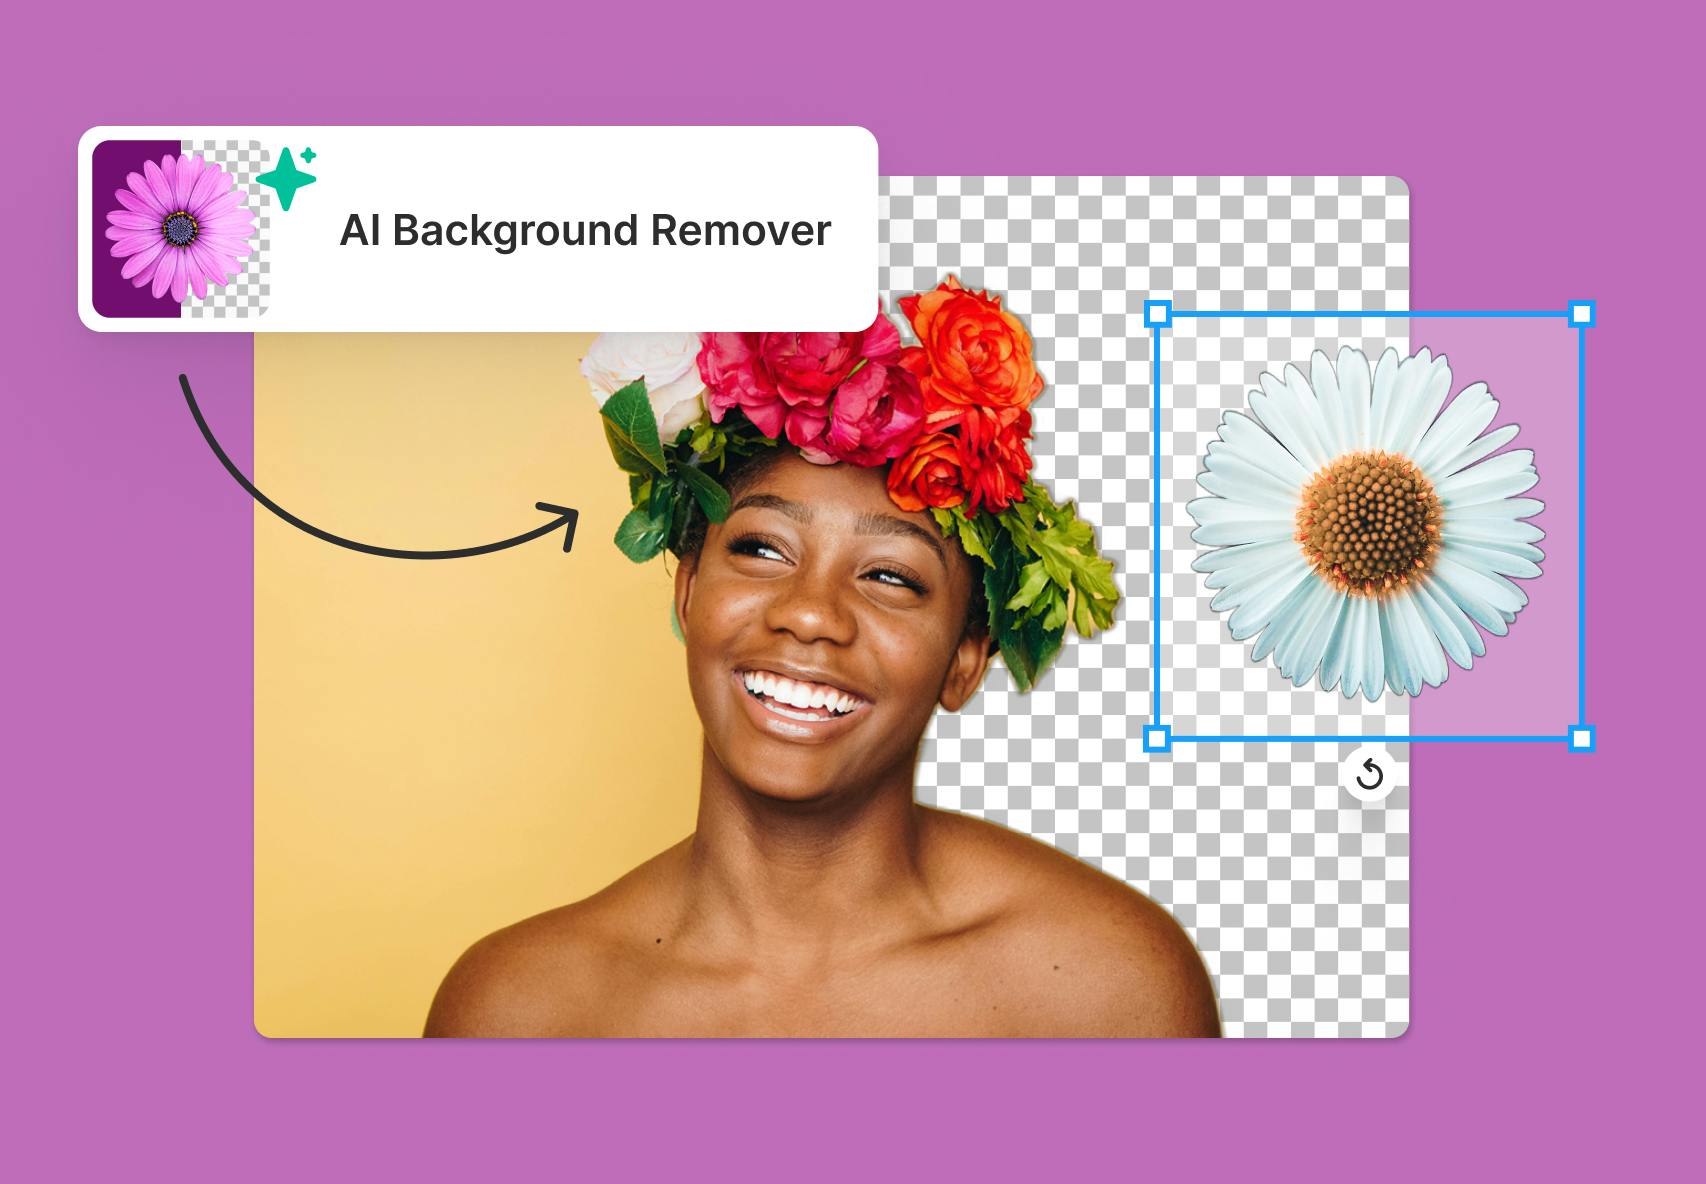 AI Background Remover | Remove Backgrounds from Images in Seconds